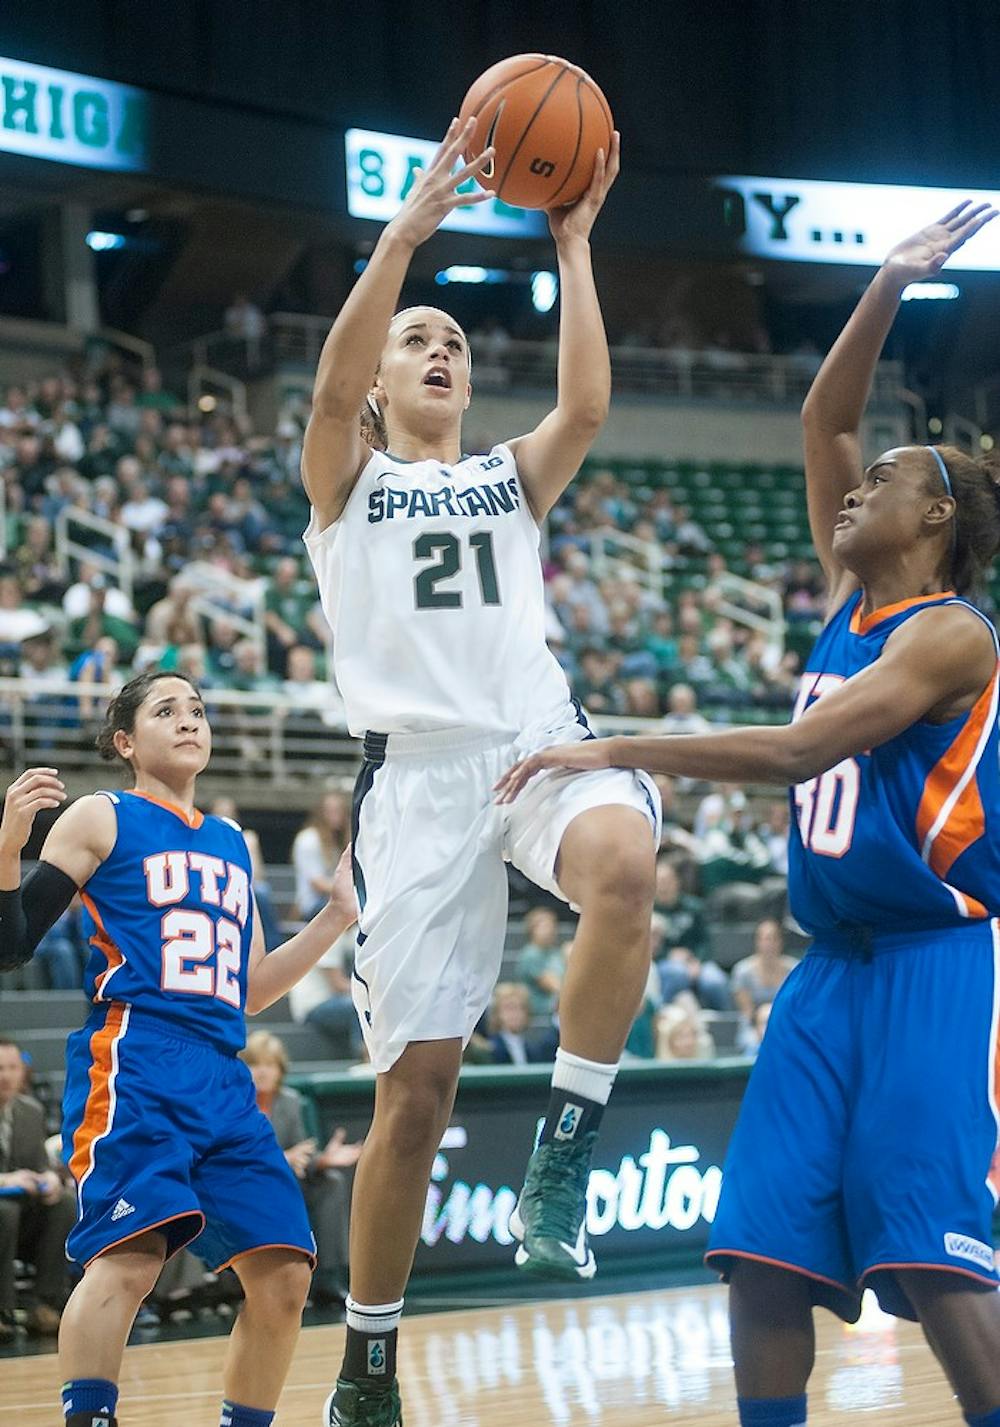 	<p>Junior guard Klarissa Bell makes a field goal, something that she tried for 16 times in the game. The Spartans defeated the Mavericks, 83-39, Nov. 11, 2012, at Breslin Center. Justin Wan/The State News</p>